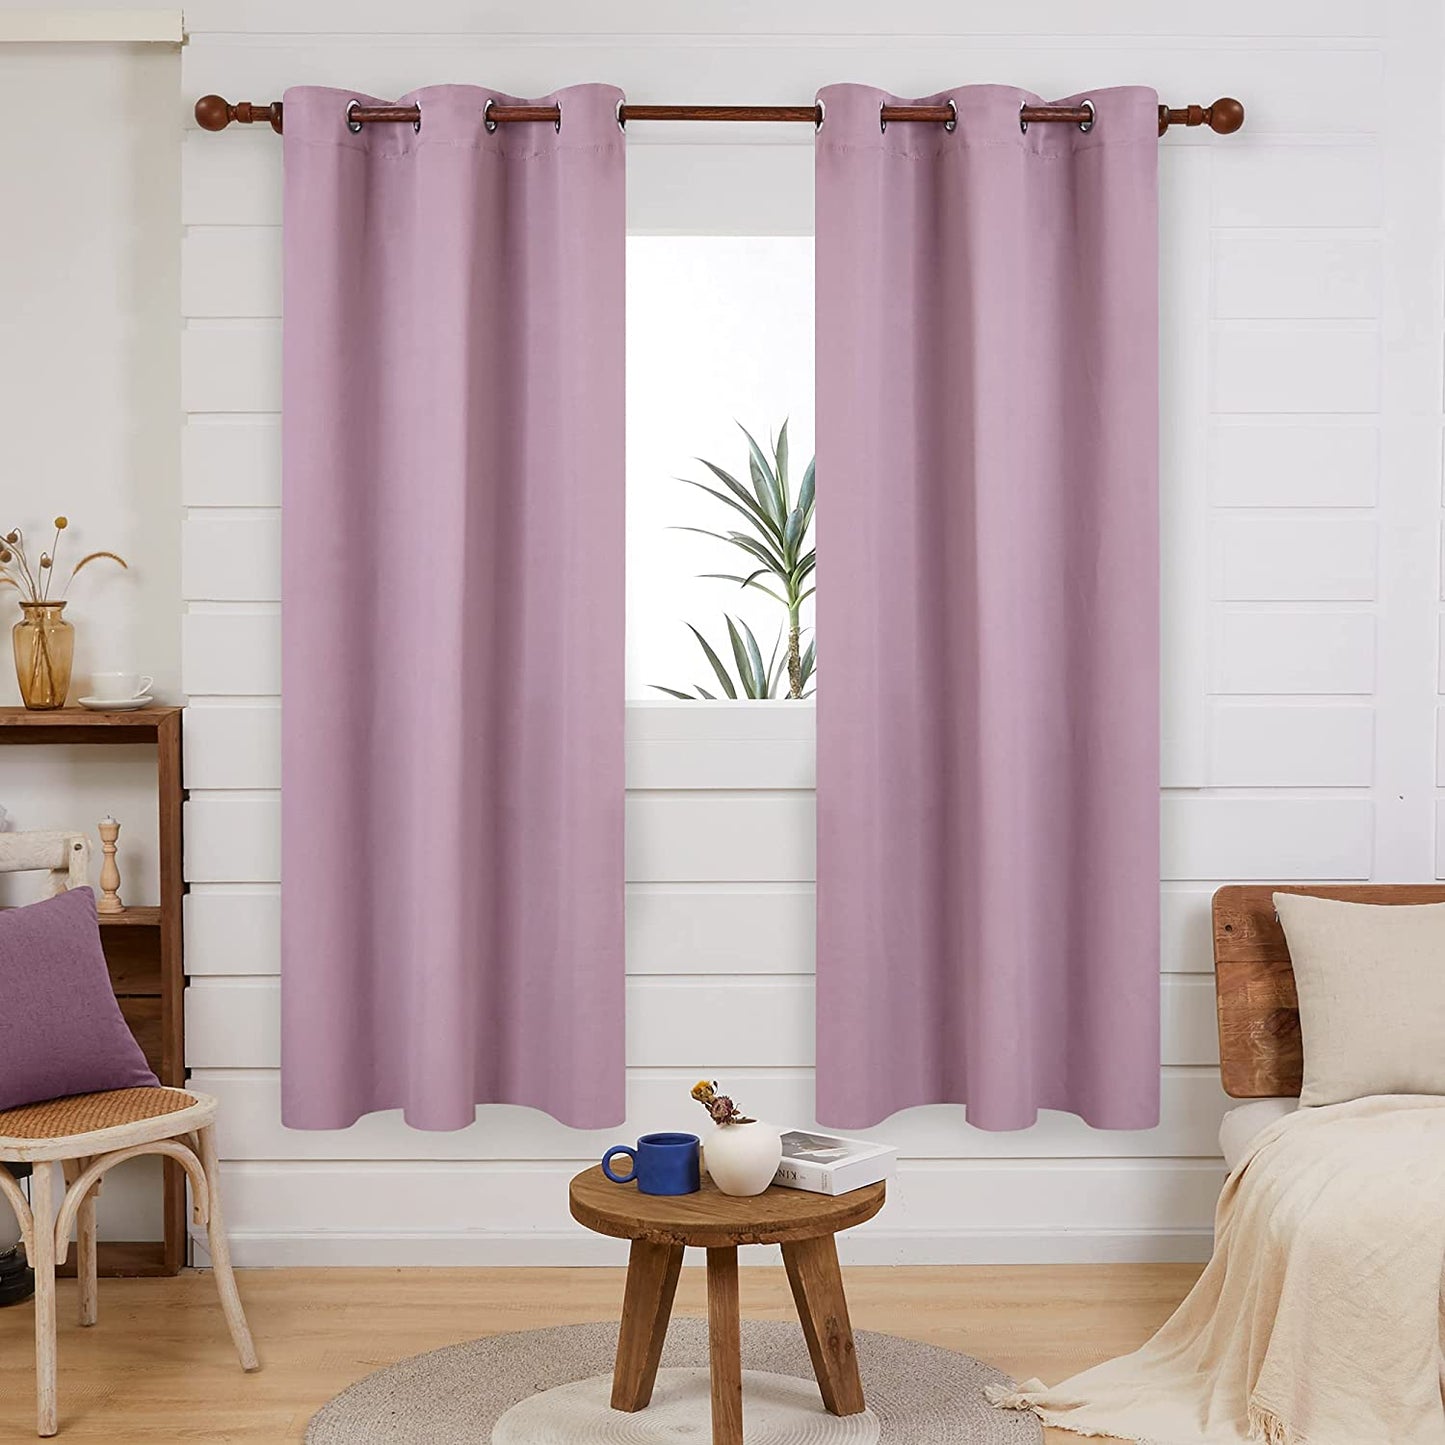 Deconovo 100% Blackout Curtains Room Darkening Thermal Insulated Blackout Grommet Window Curtain for Living Room,Black,42X120-Inch,1 Panel  Deconovo Lavender 42X63 Inch 